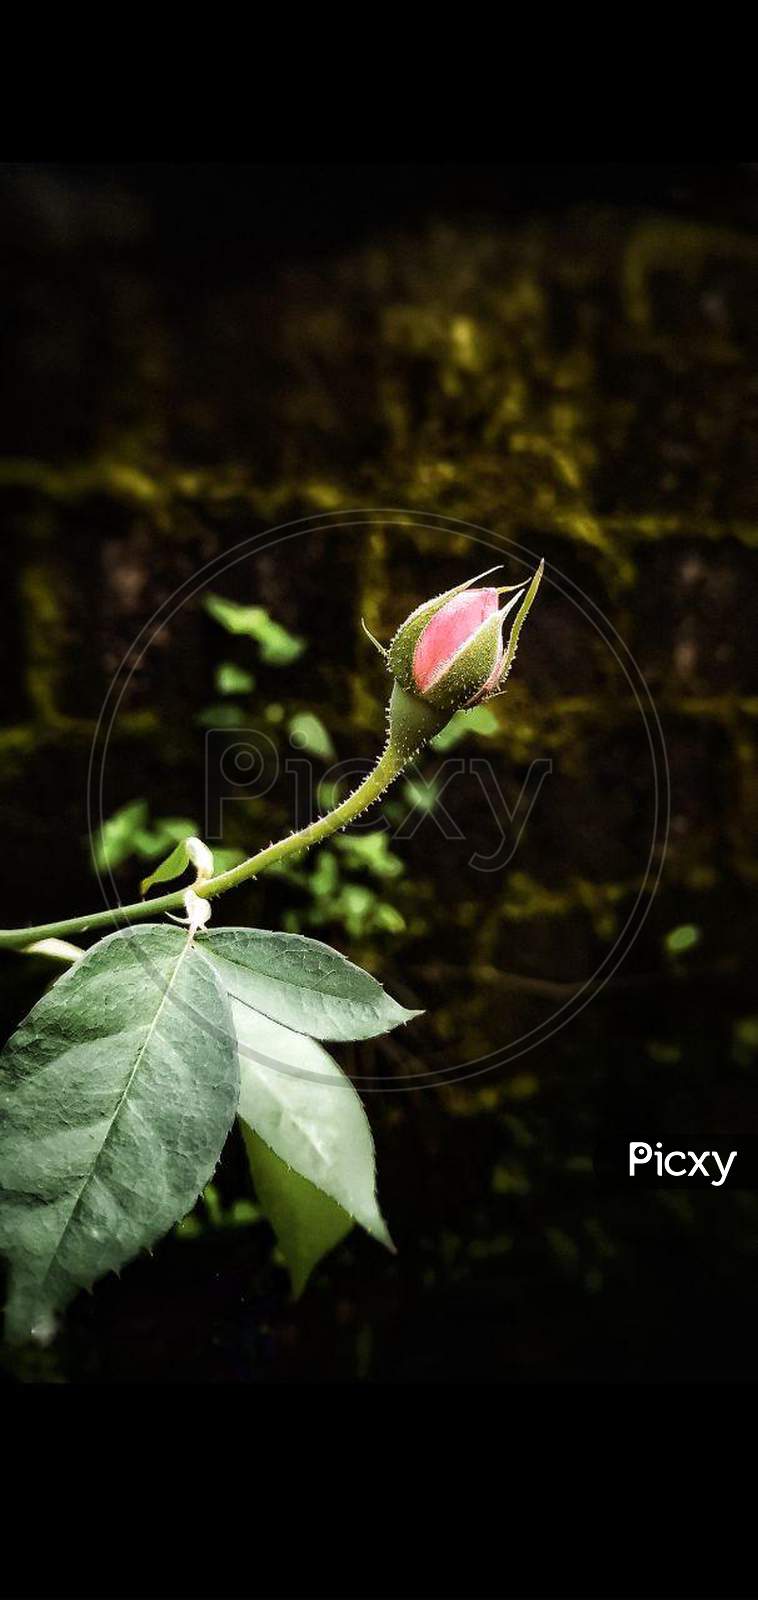 Image of Flower Bud-GD994068-Picxy